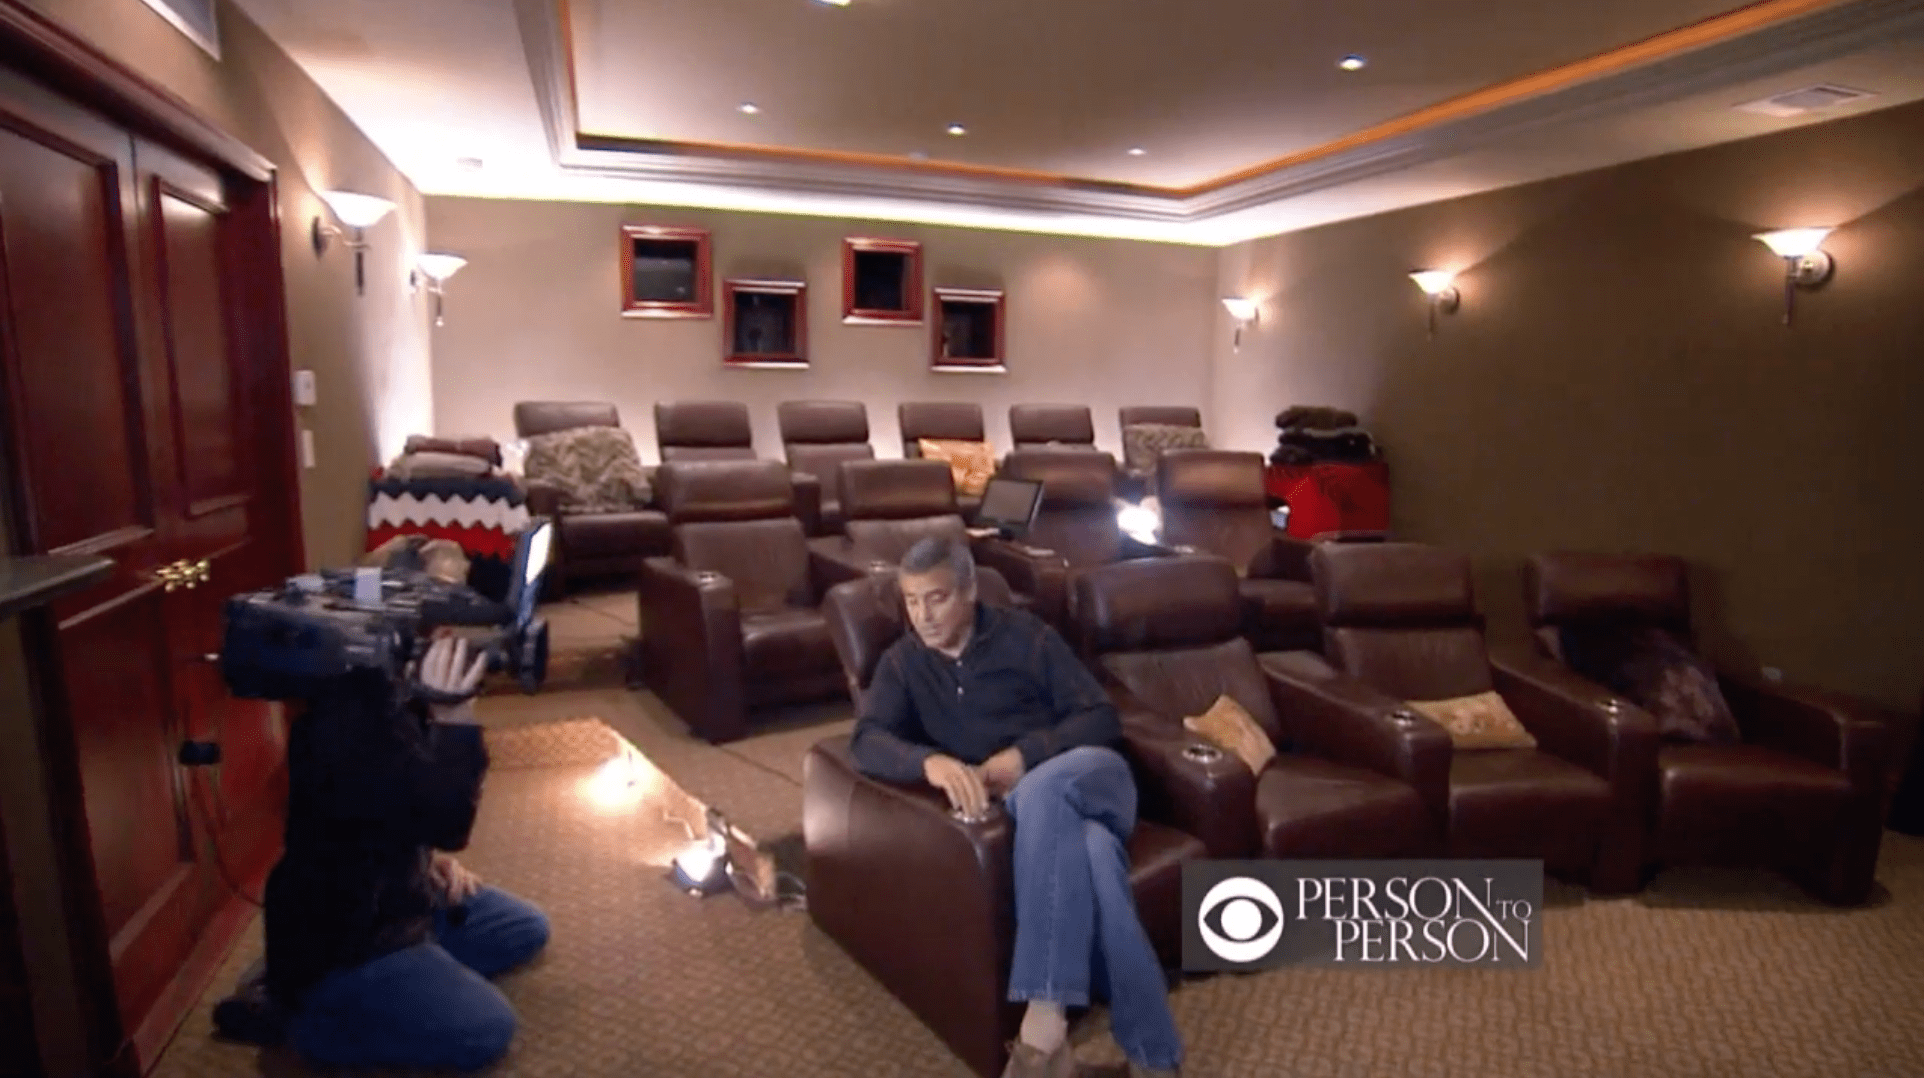 A part of George Clooney's Los Angeles home as seen on CBS News' "Person to Person" on February 8, 2012. | Source: YouTube/CBS News